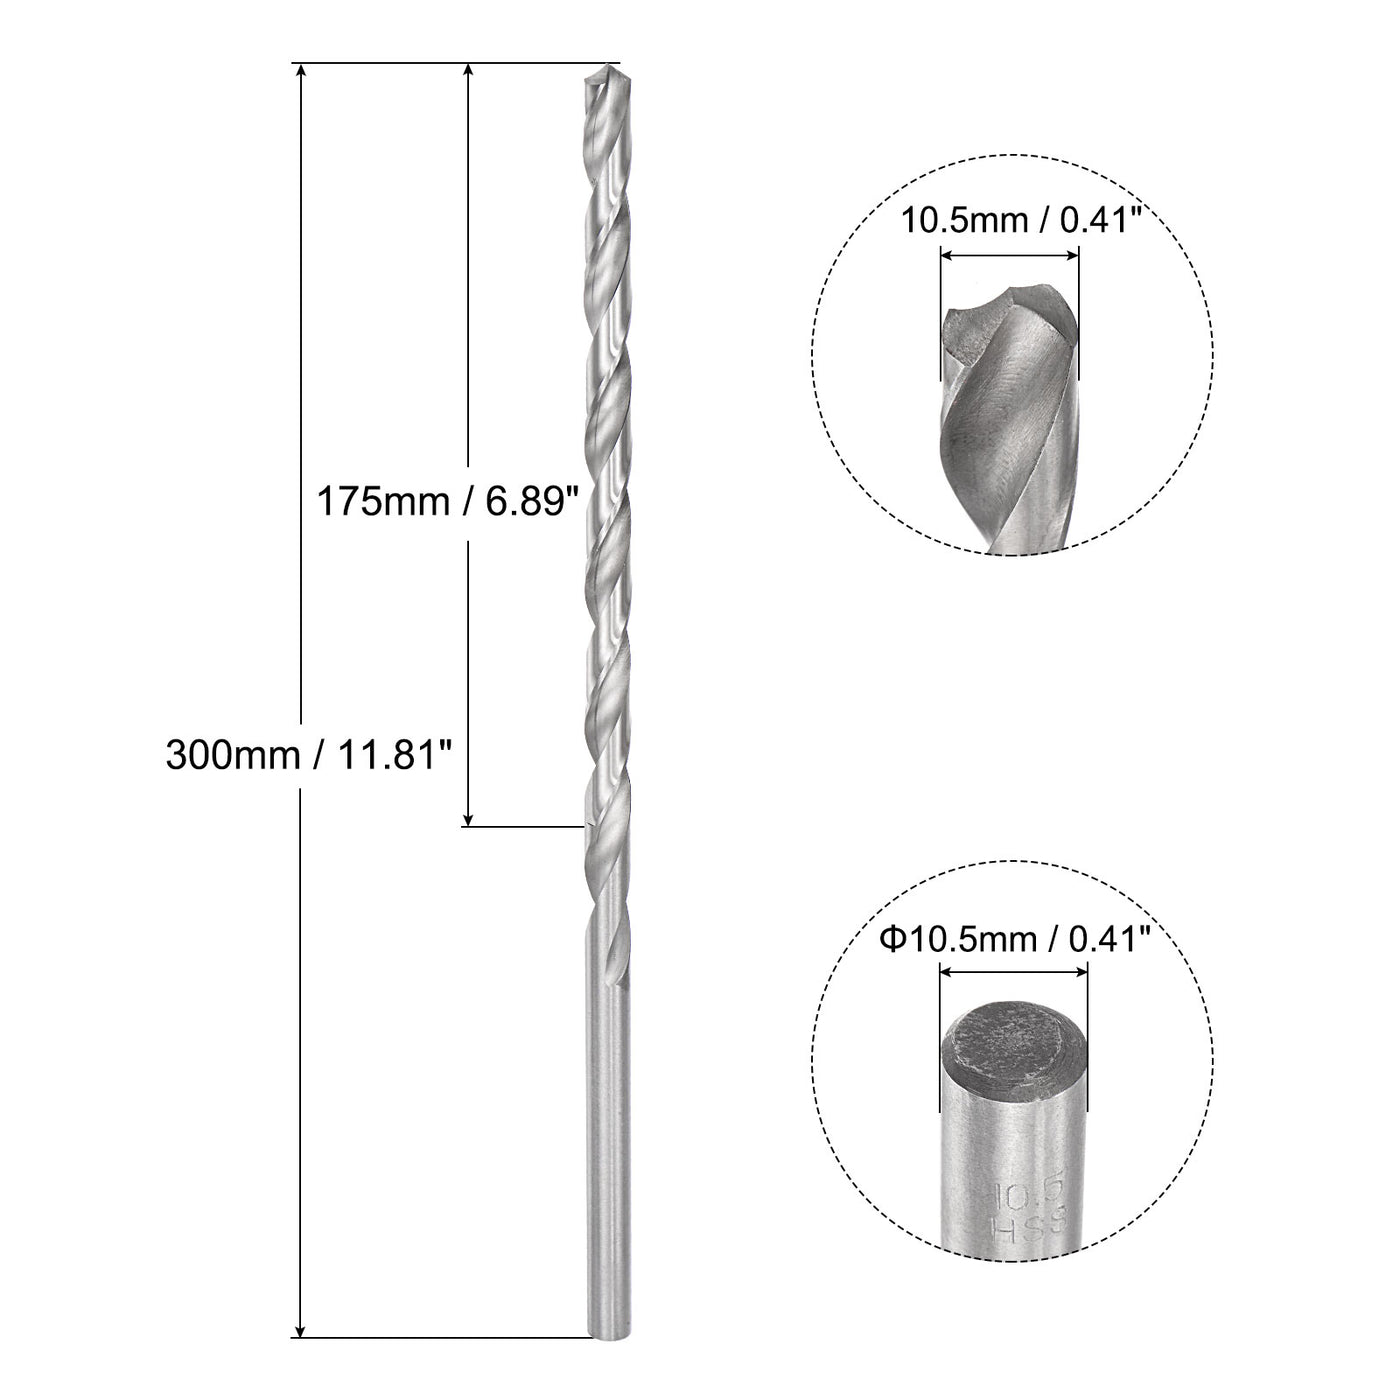 uxcell Uxcell 10.5mm Twist Drill Bits, High-Speed Steel Extra Long Drill Bit 300mm Length